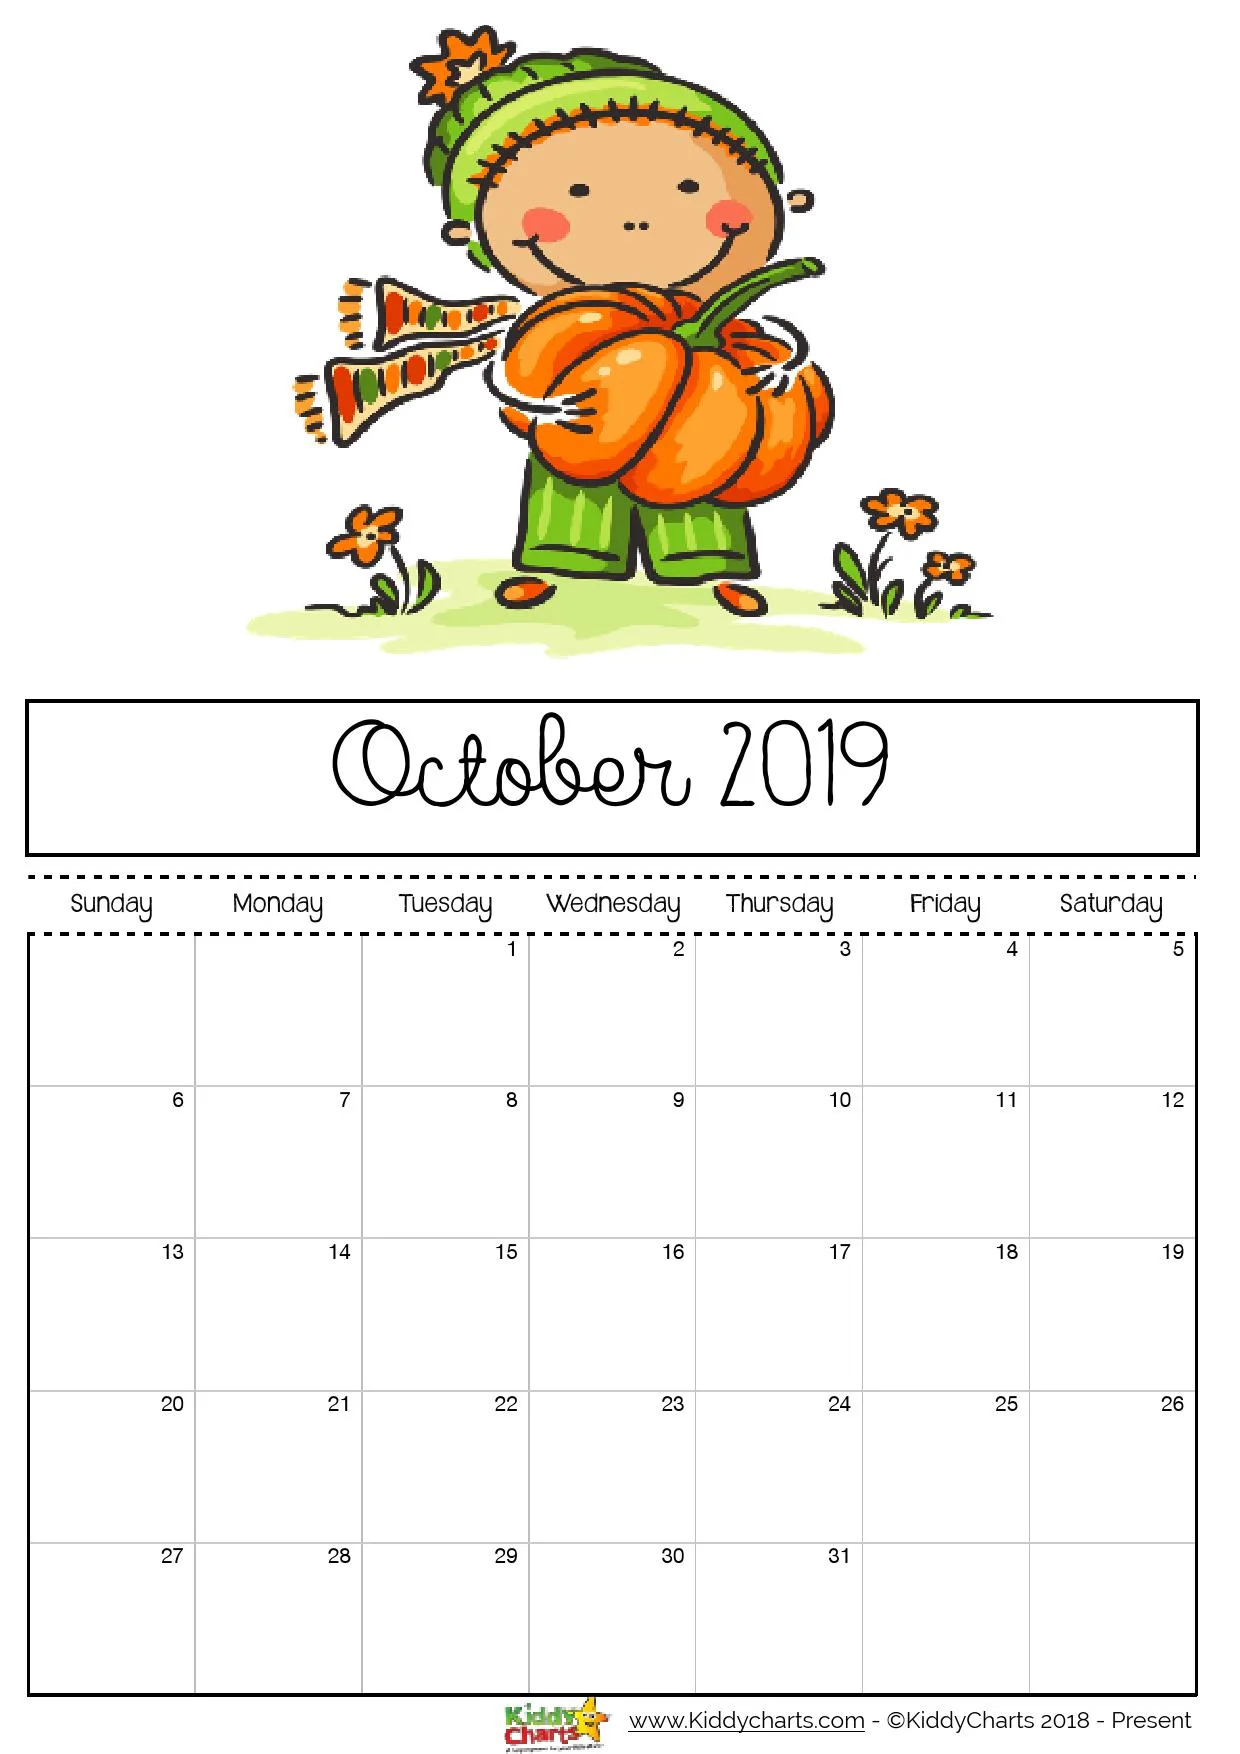 Boy with a pumpkin, and it is so very nearly pumpkin time! #printables #kidsprintables #2019calendar